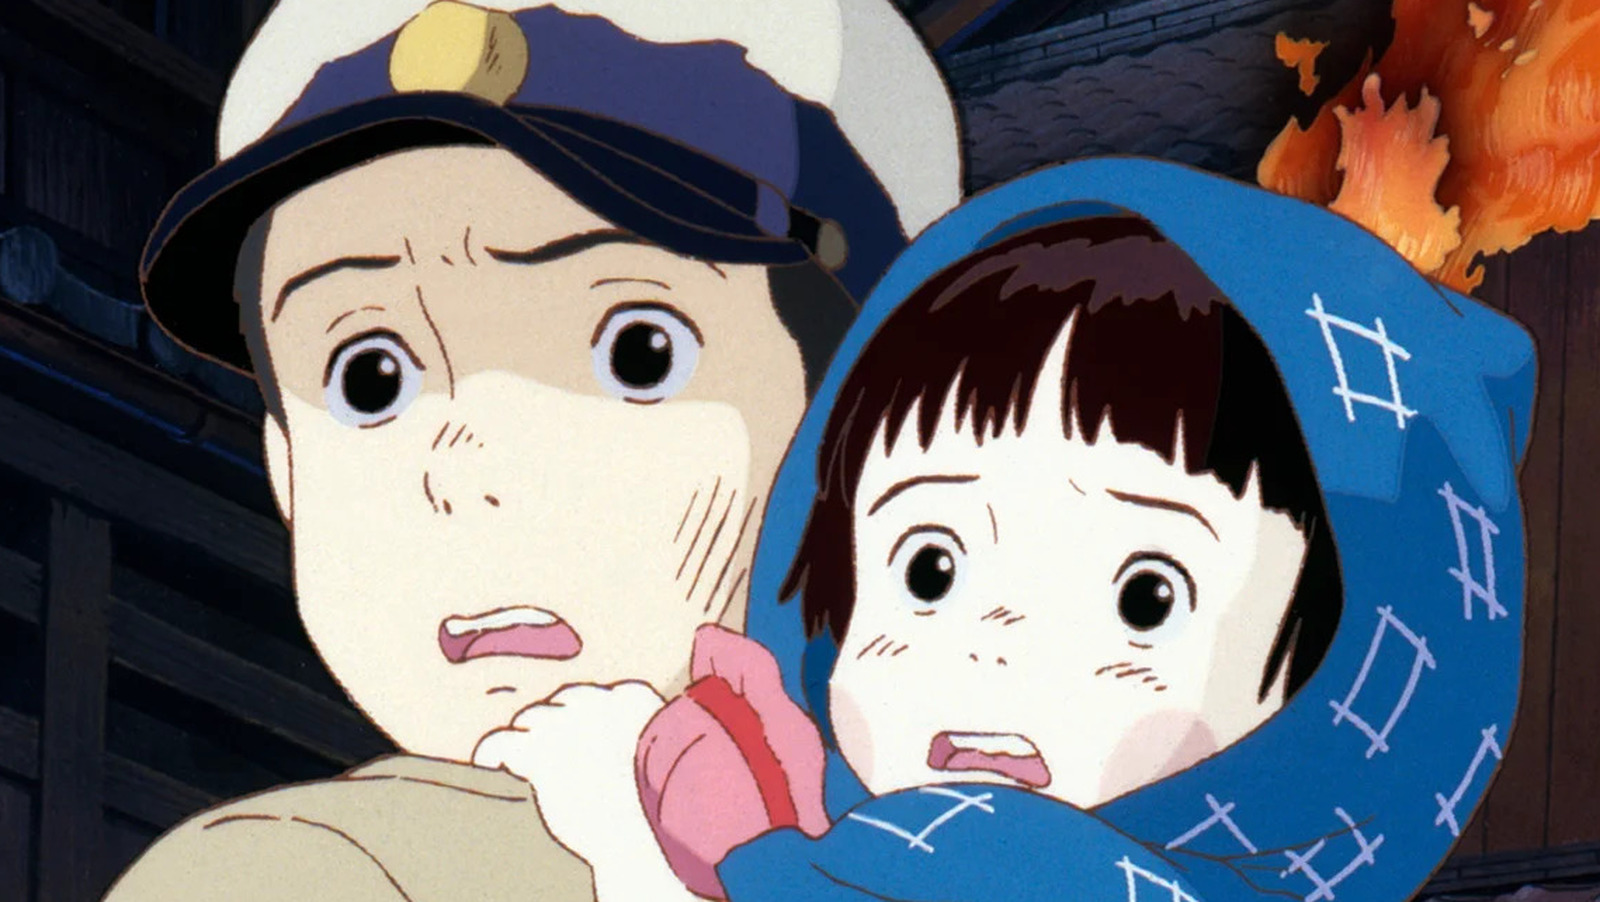 Grave of the fireflies : r/ghibli